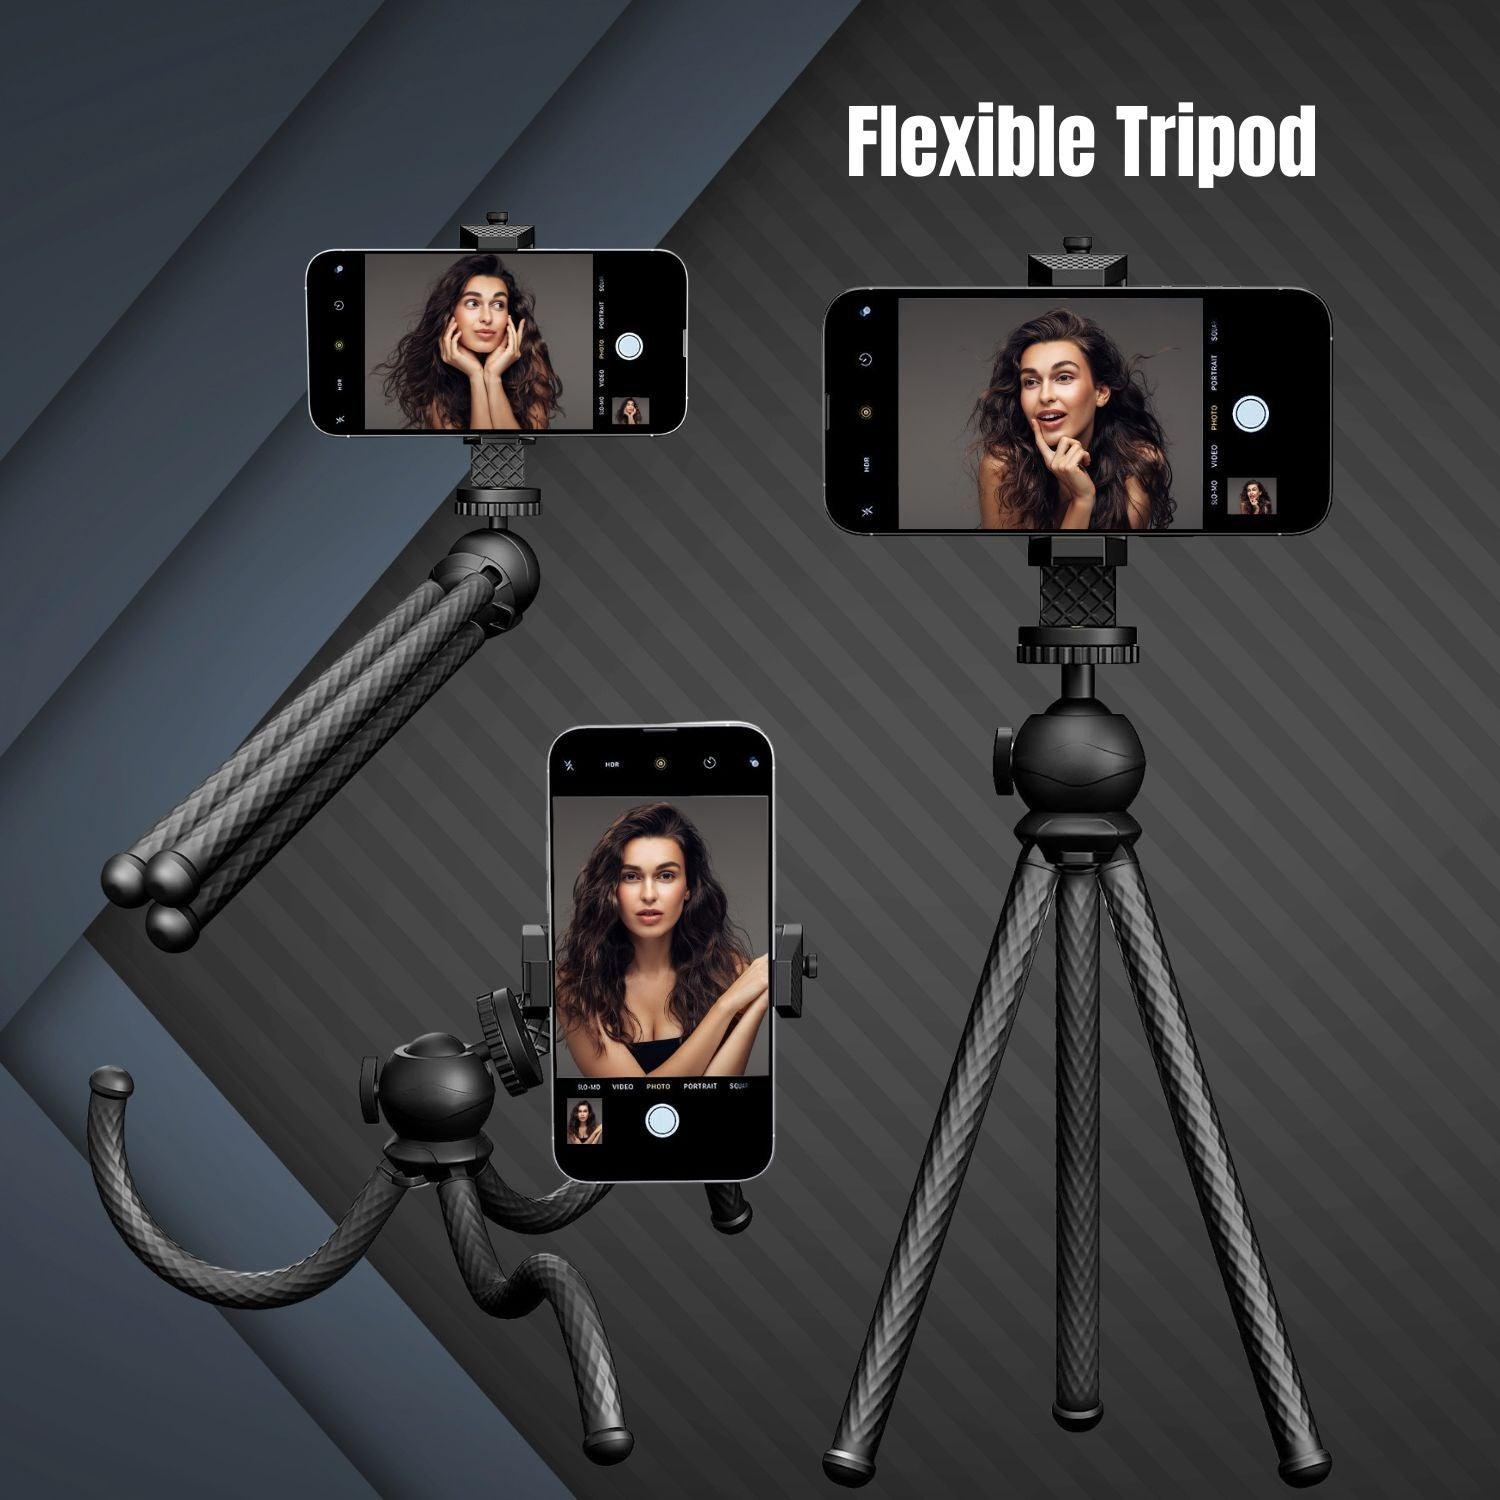 Socialite Flexible Tripod For Phone with Rotating Smartphone Mount